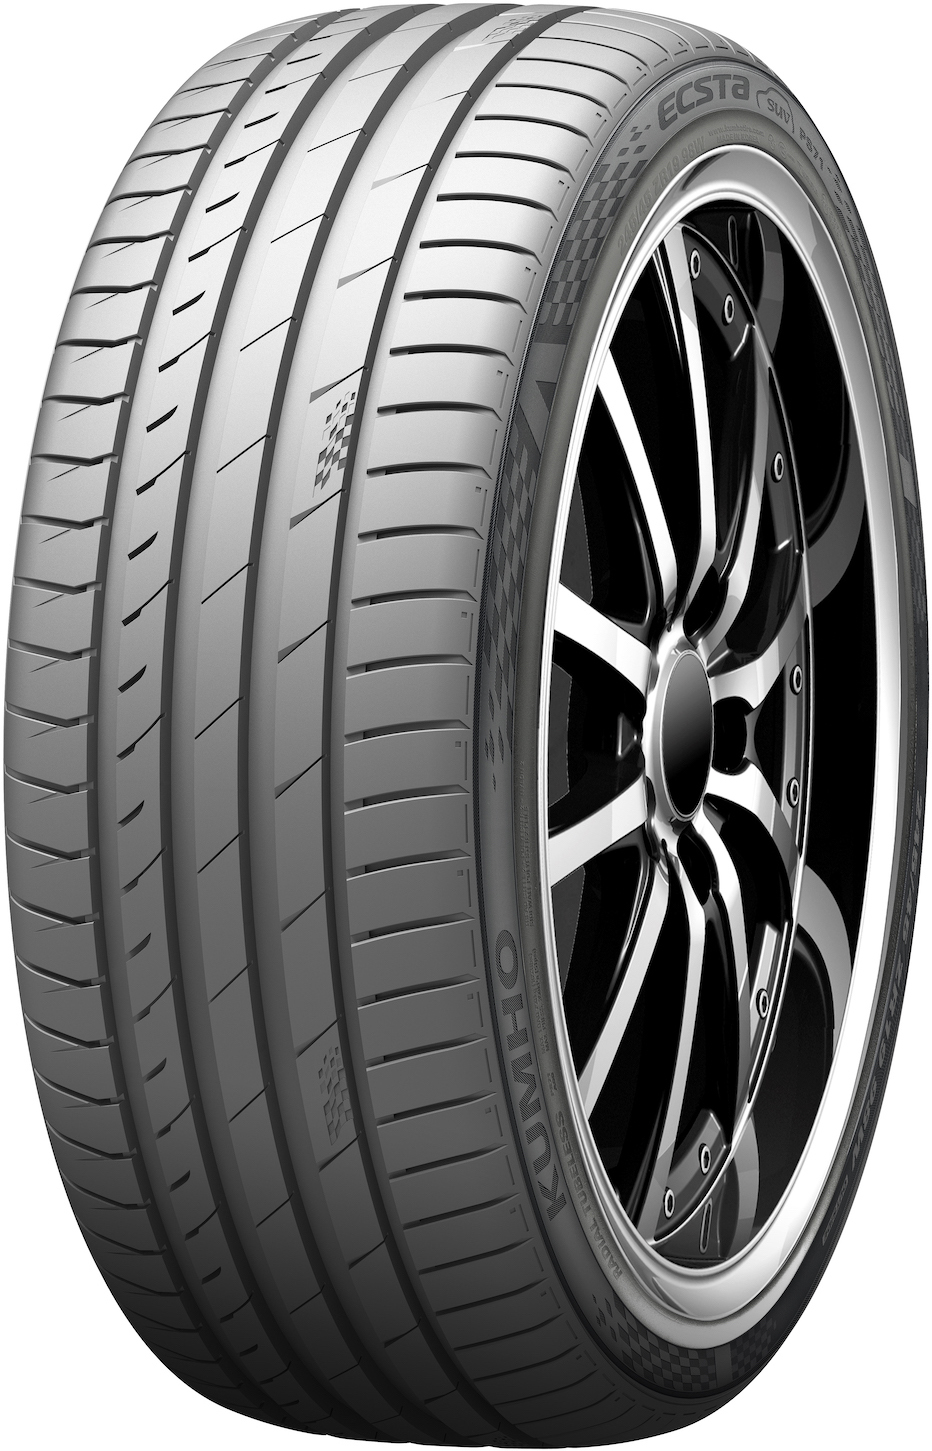 Anvelope auto KUMHO Ecsta PS71 SUV 285/40 R21 109Y